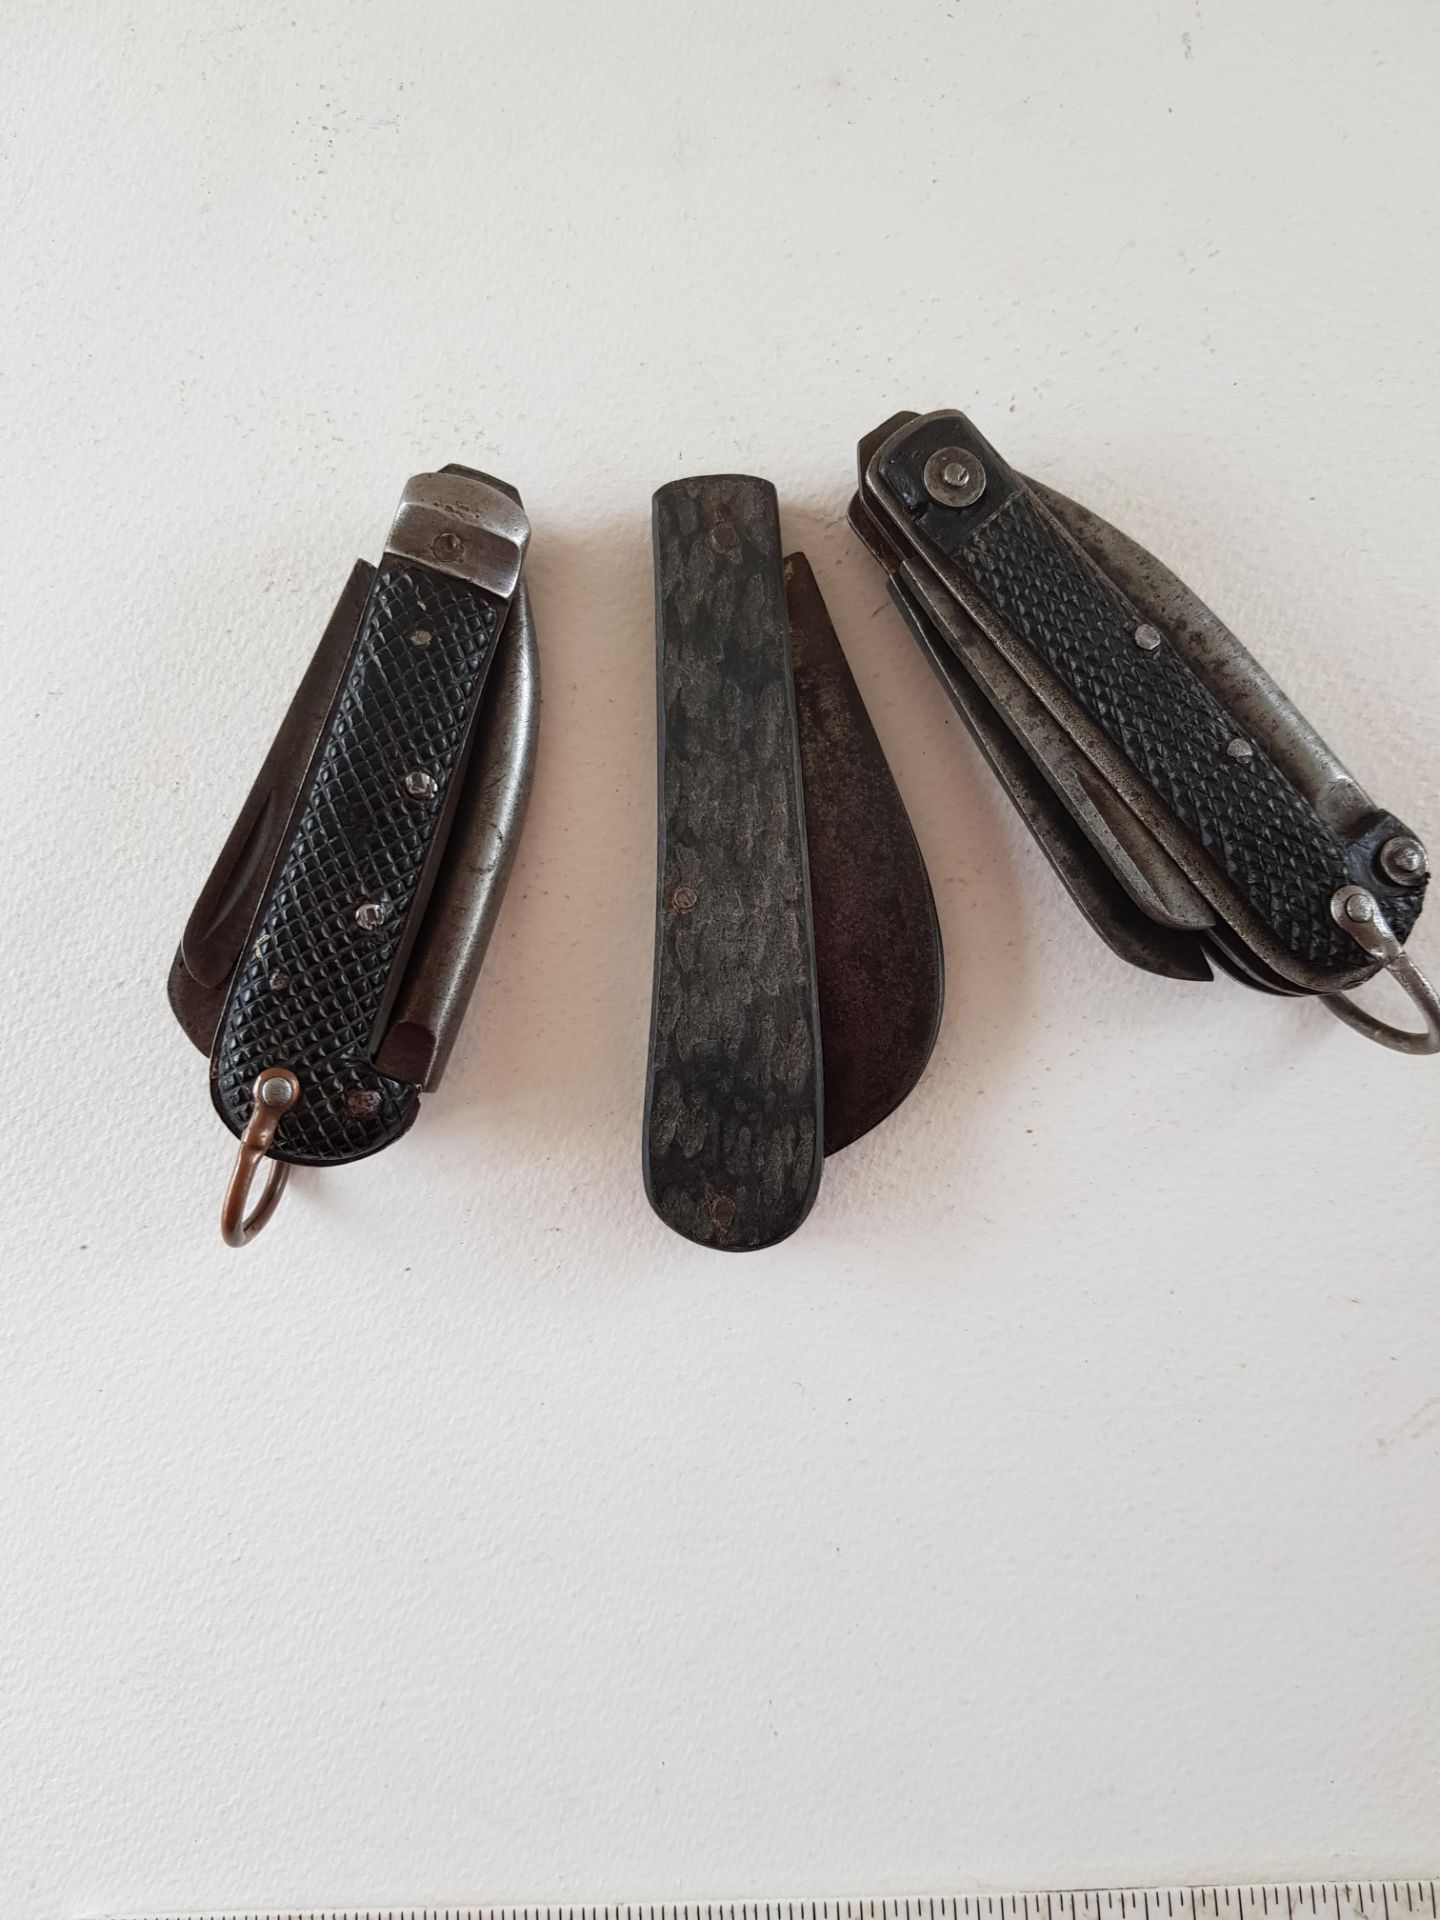 Military Jack Knives Plus 2 Others - Image 2 of 4